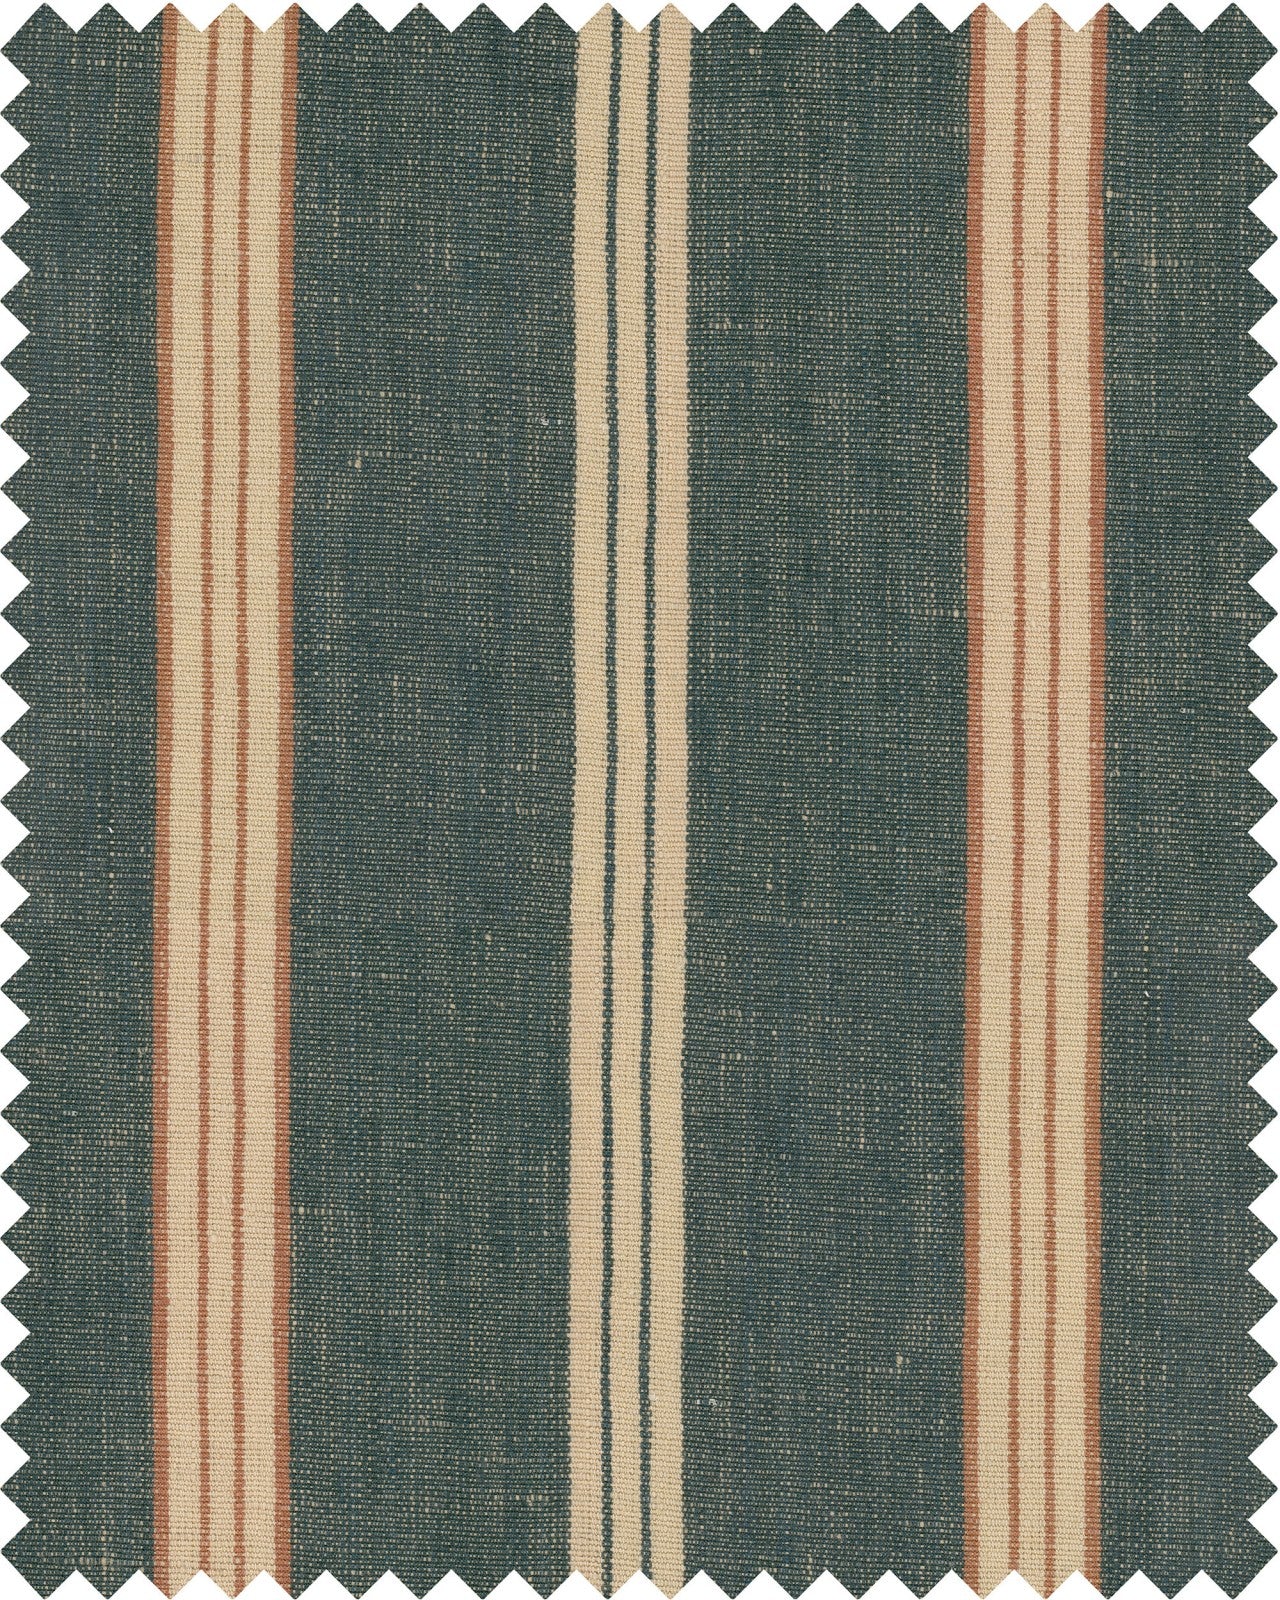 Oregon Stripes Linen fabric in blue color - pattern number FB00086 - by Mind The Gap in the Woodstock collection